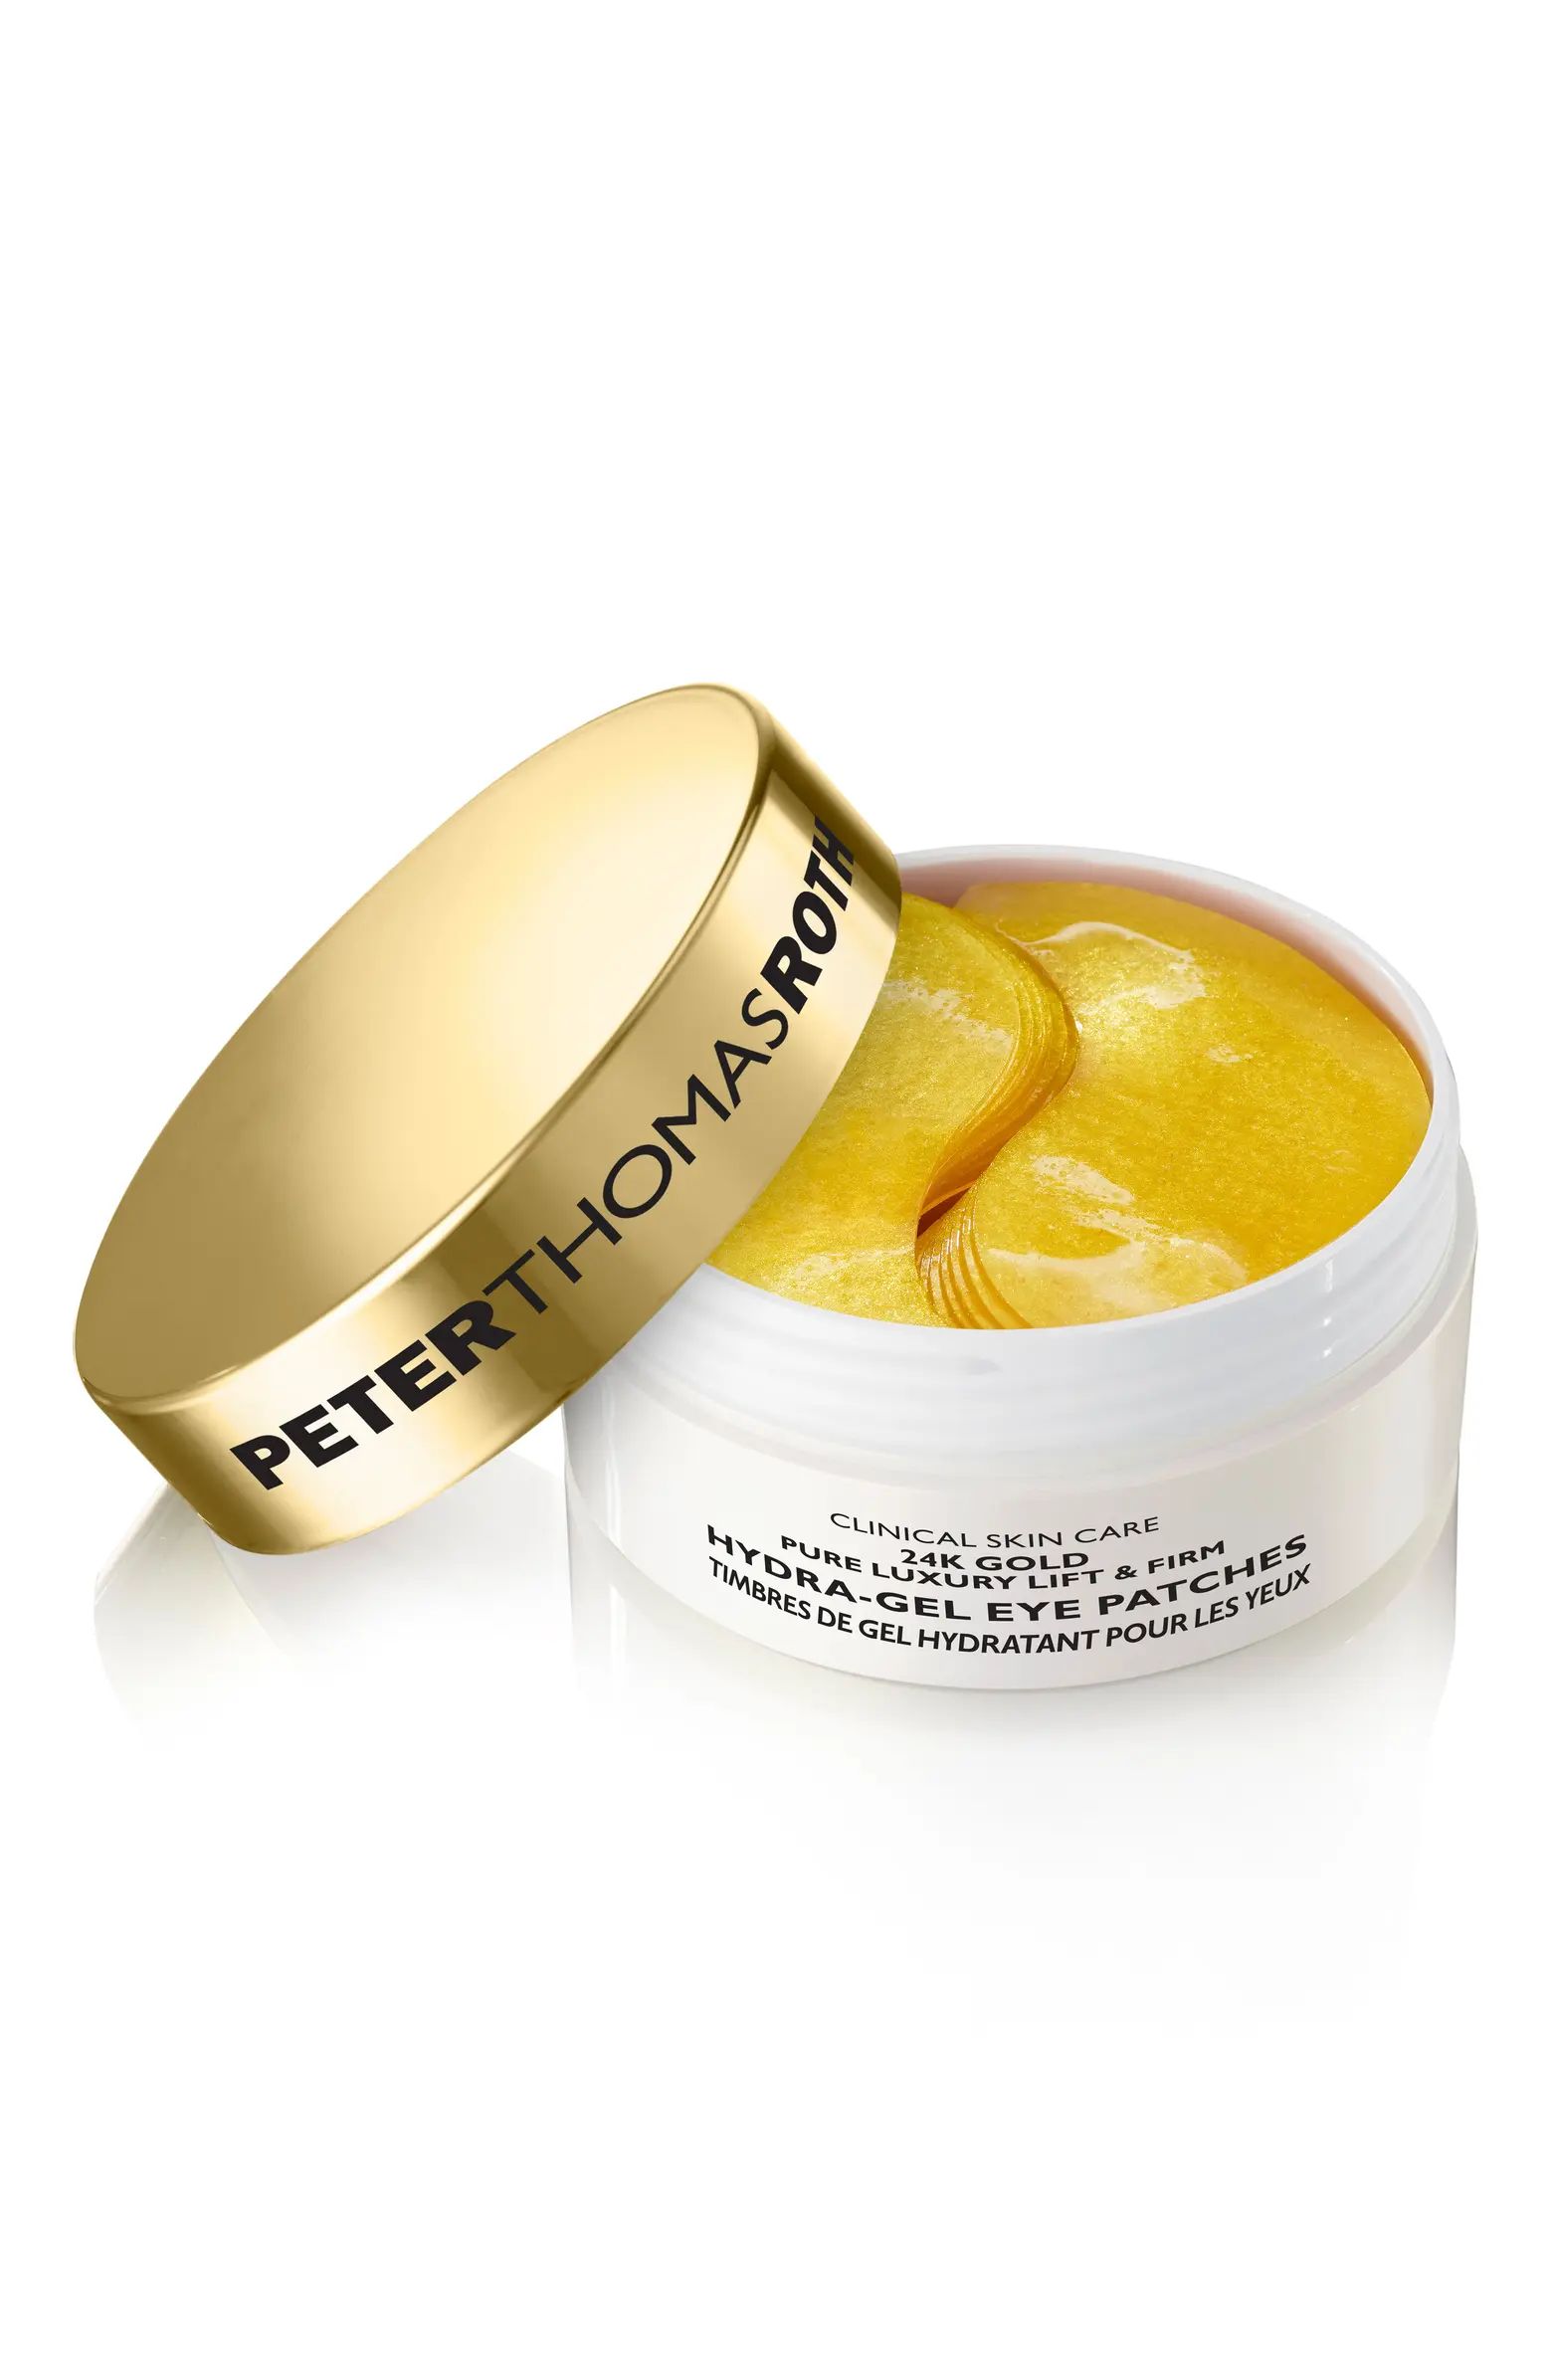 Peter Thomas Roth 24K Gold Lift & Firm Hydra-Gel Eye Patches | Nordstrom | Nordstrom